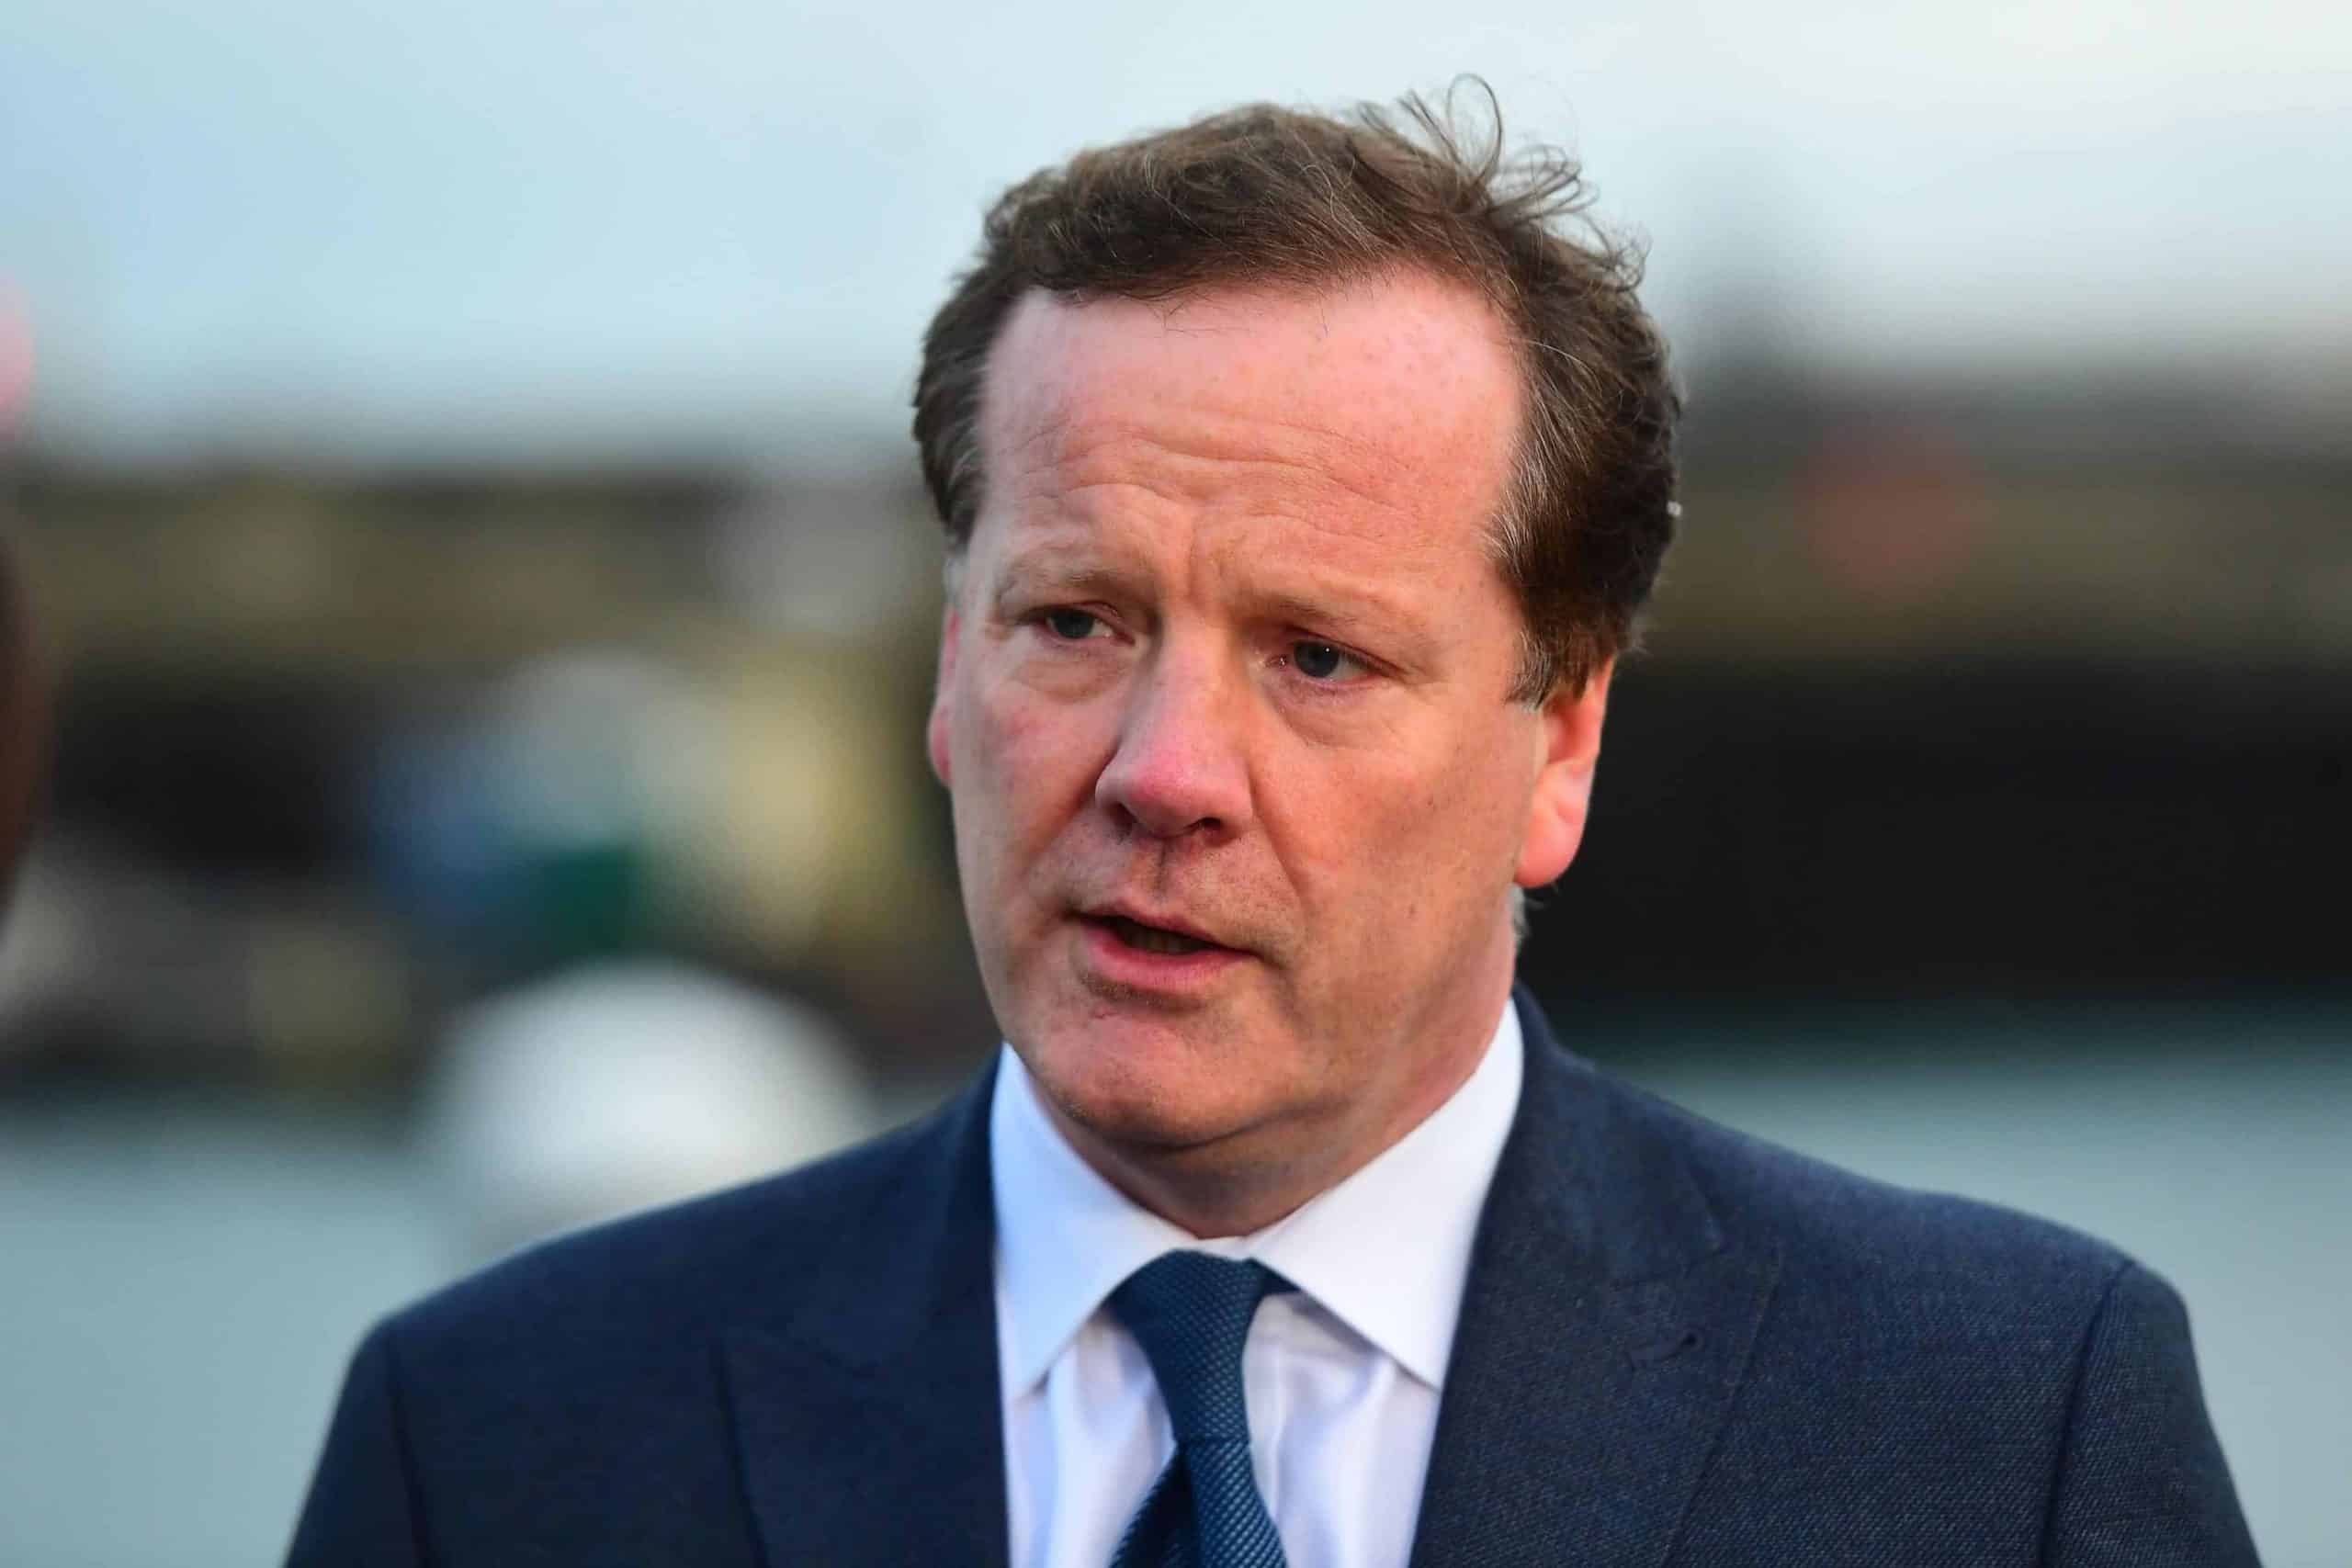 Tory MP MP Charlie Elphicke appeared in court to deny sexually assaulting two women.